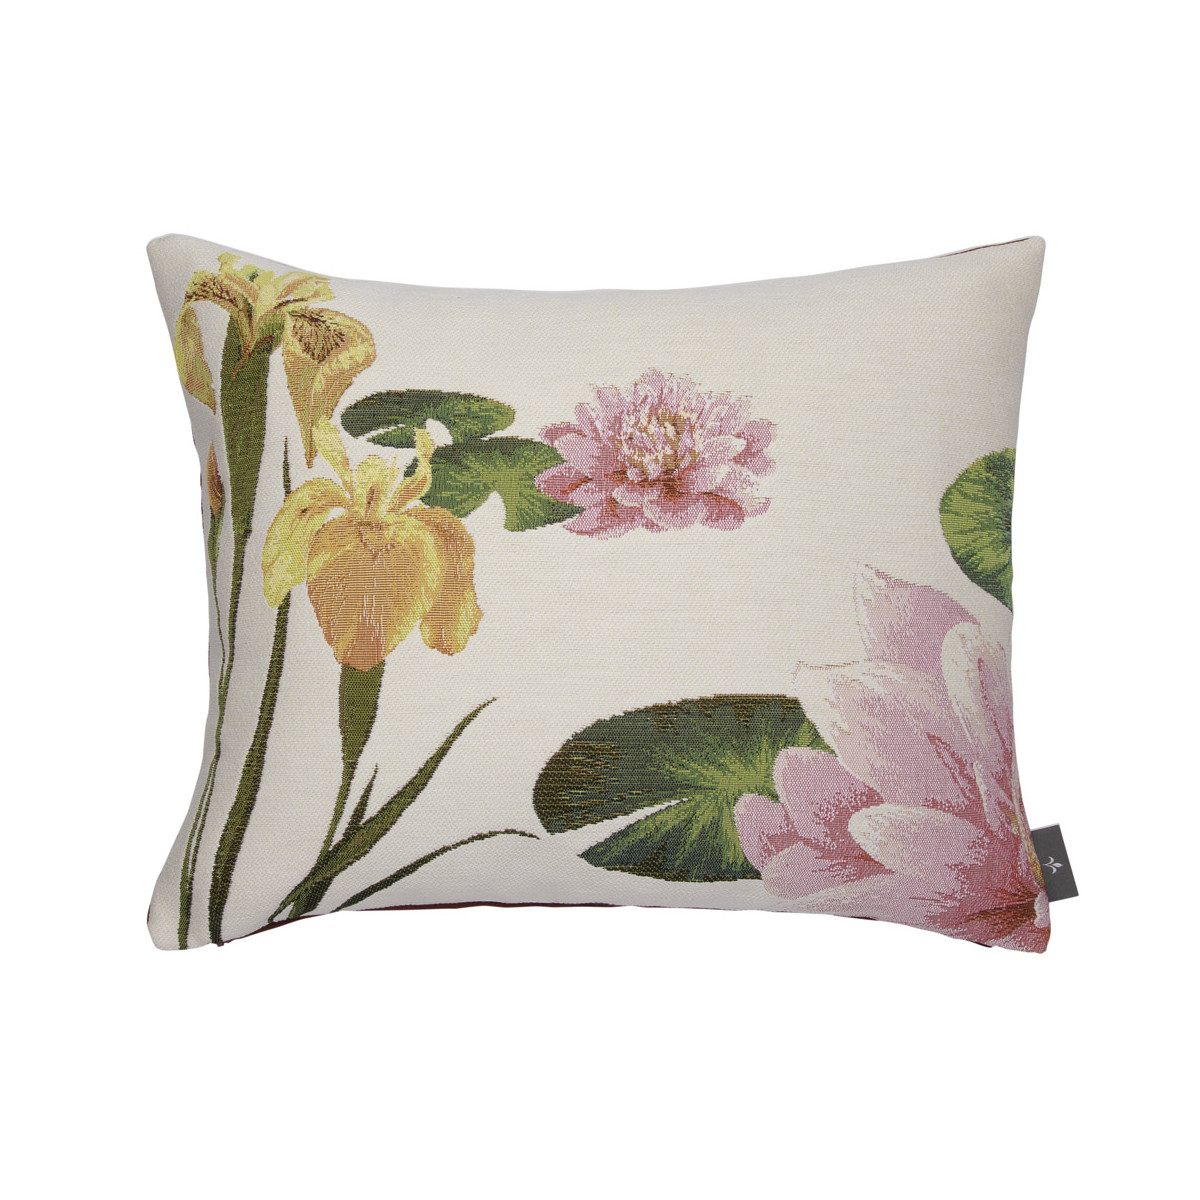 Coussin giverny iris et nympheas made in france blanc 38x48